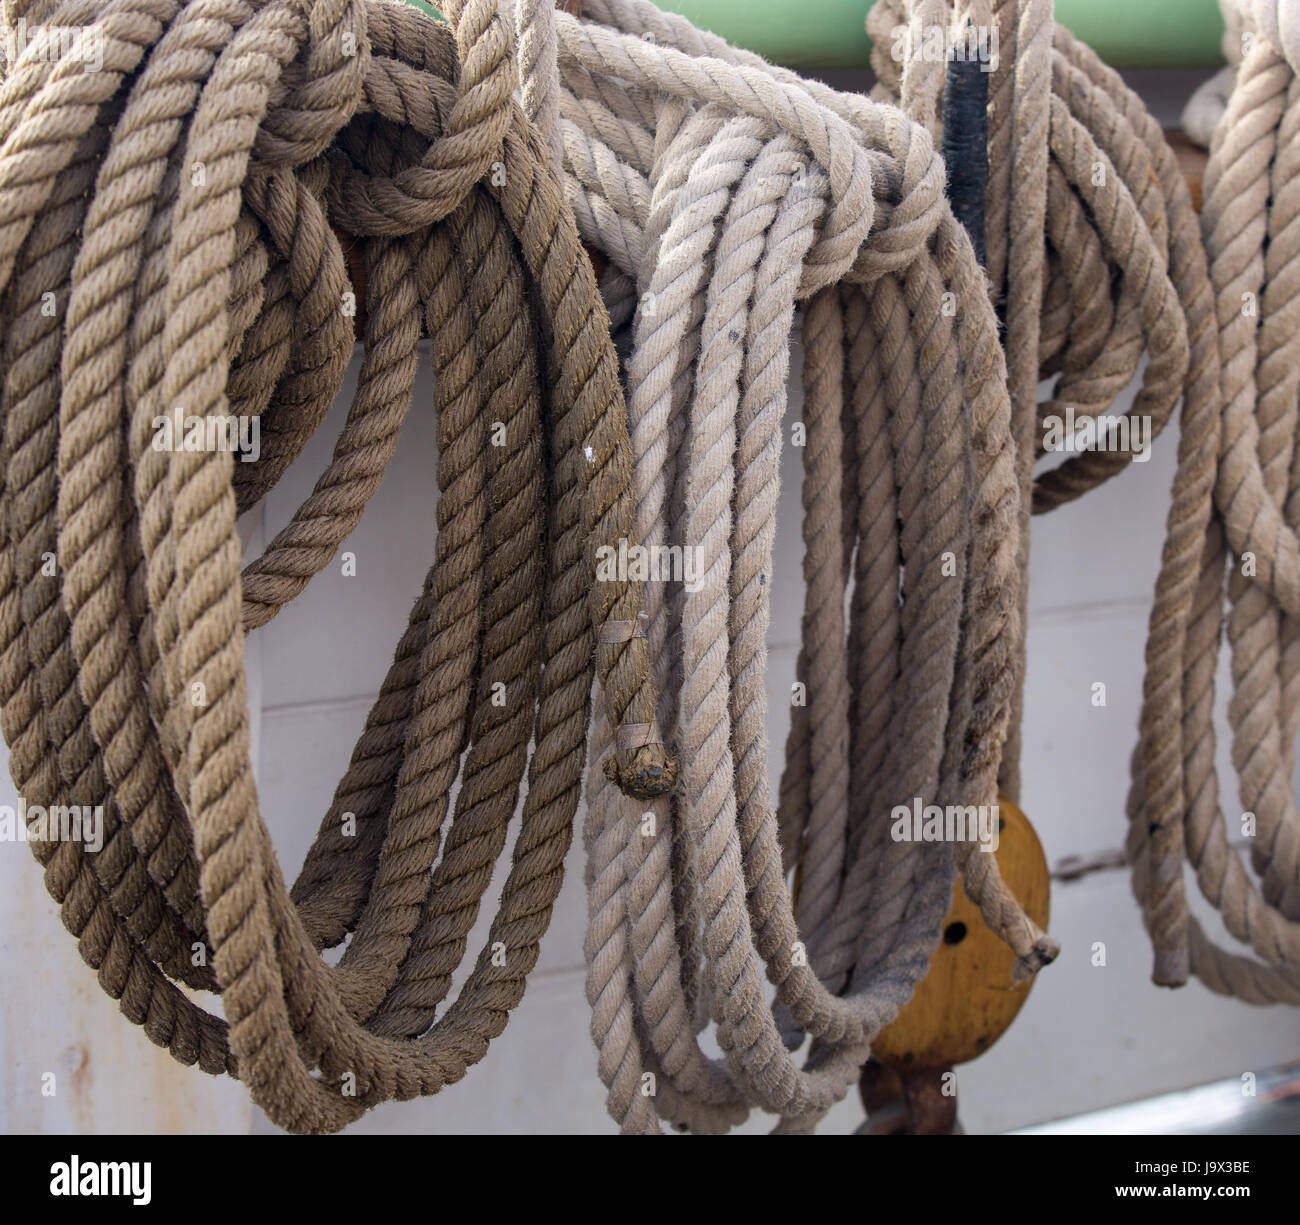 Coils of hemp rope forming part of the rigging on an old sailing ship Stock Photo